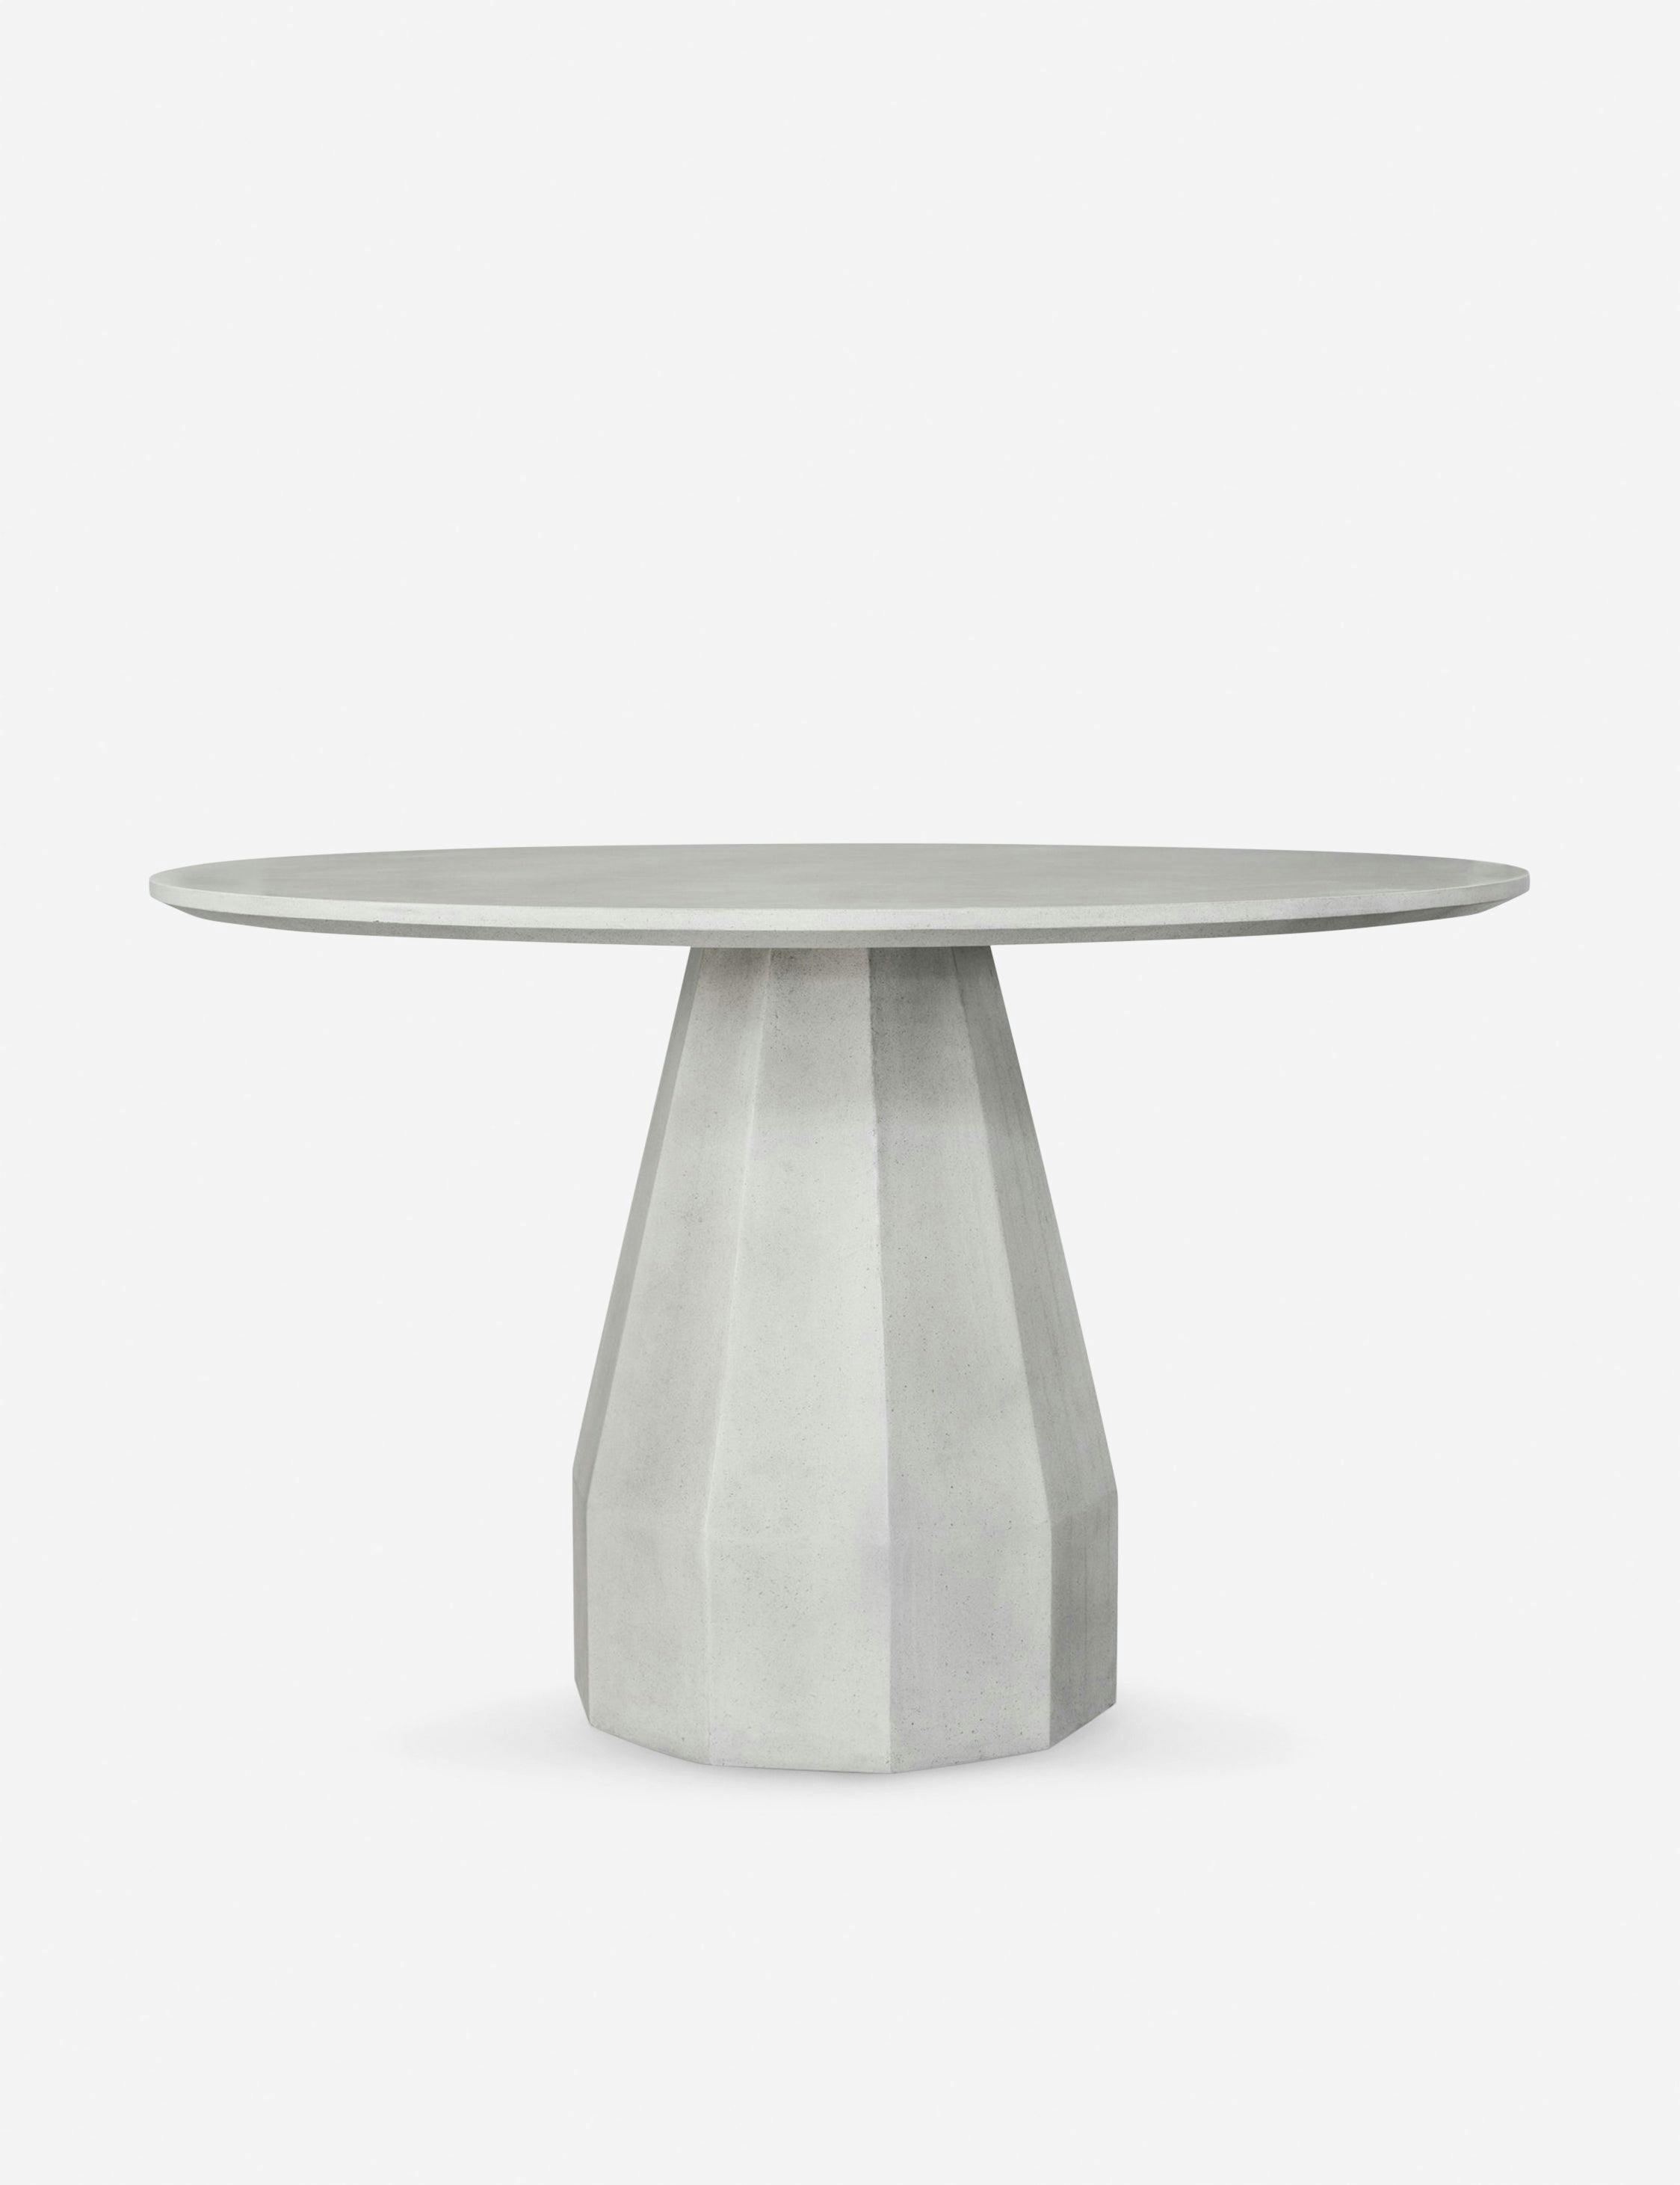 Chrysanthe Indoor / Outdoor Round Dining Table